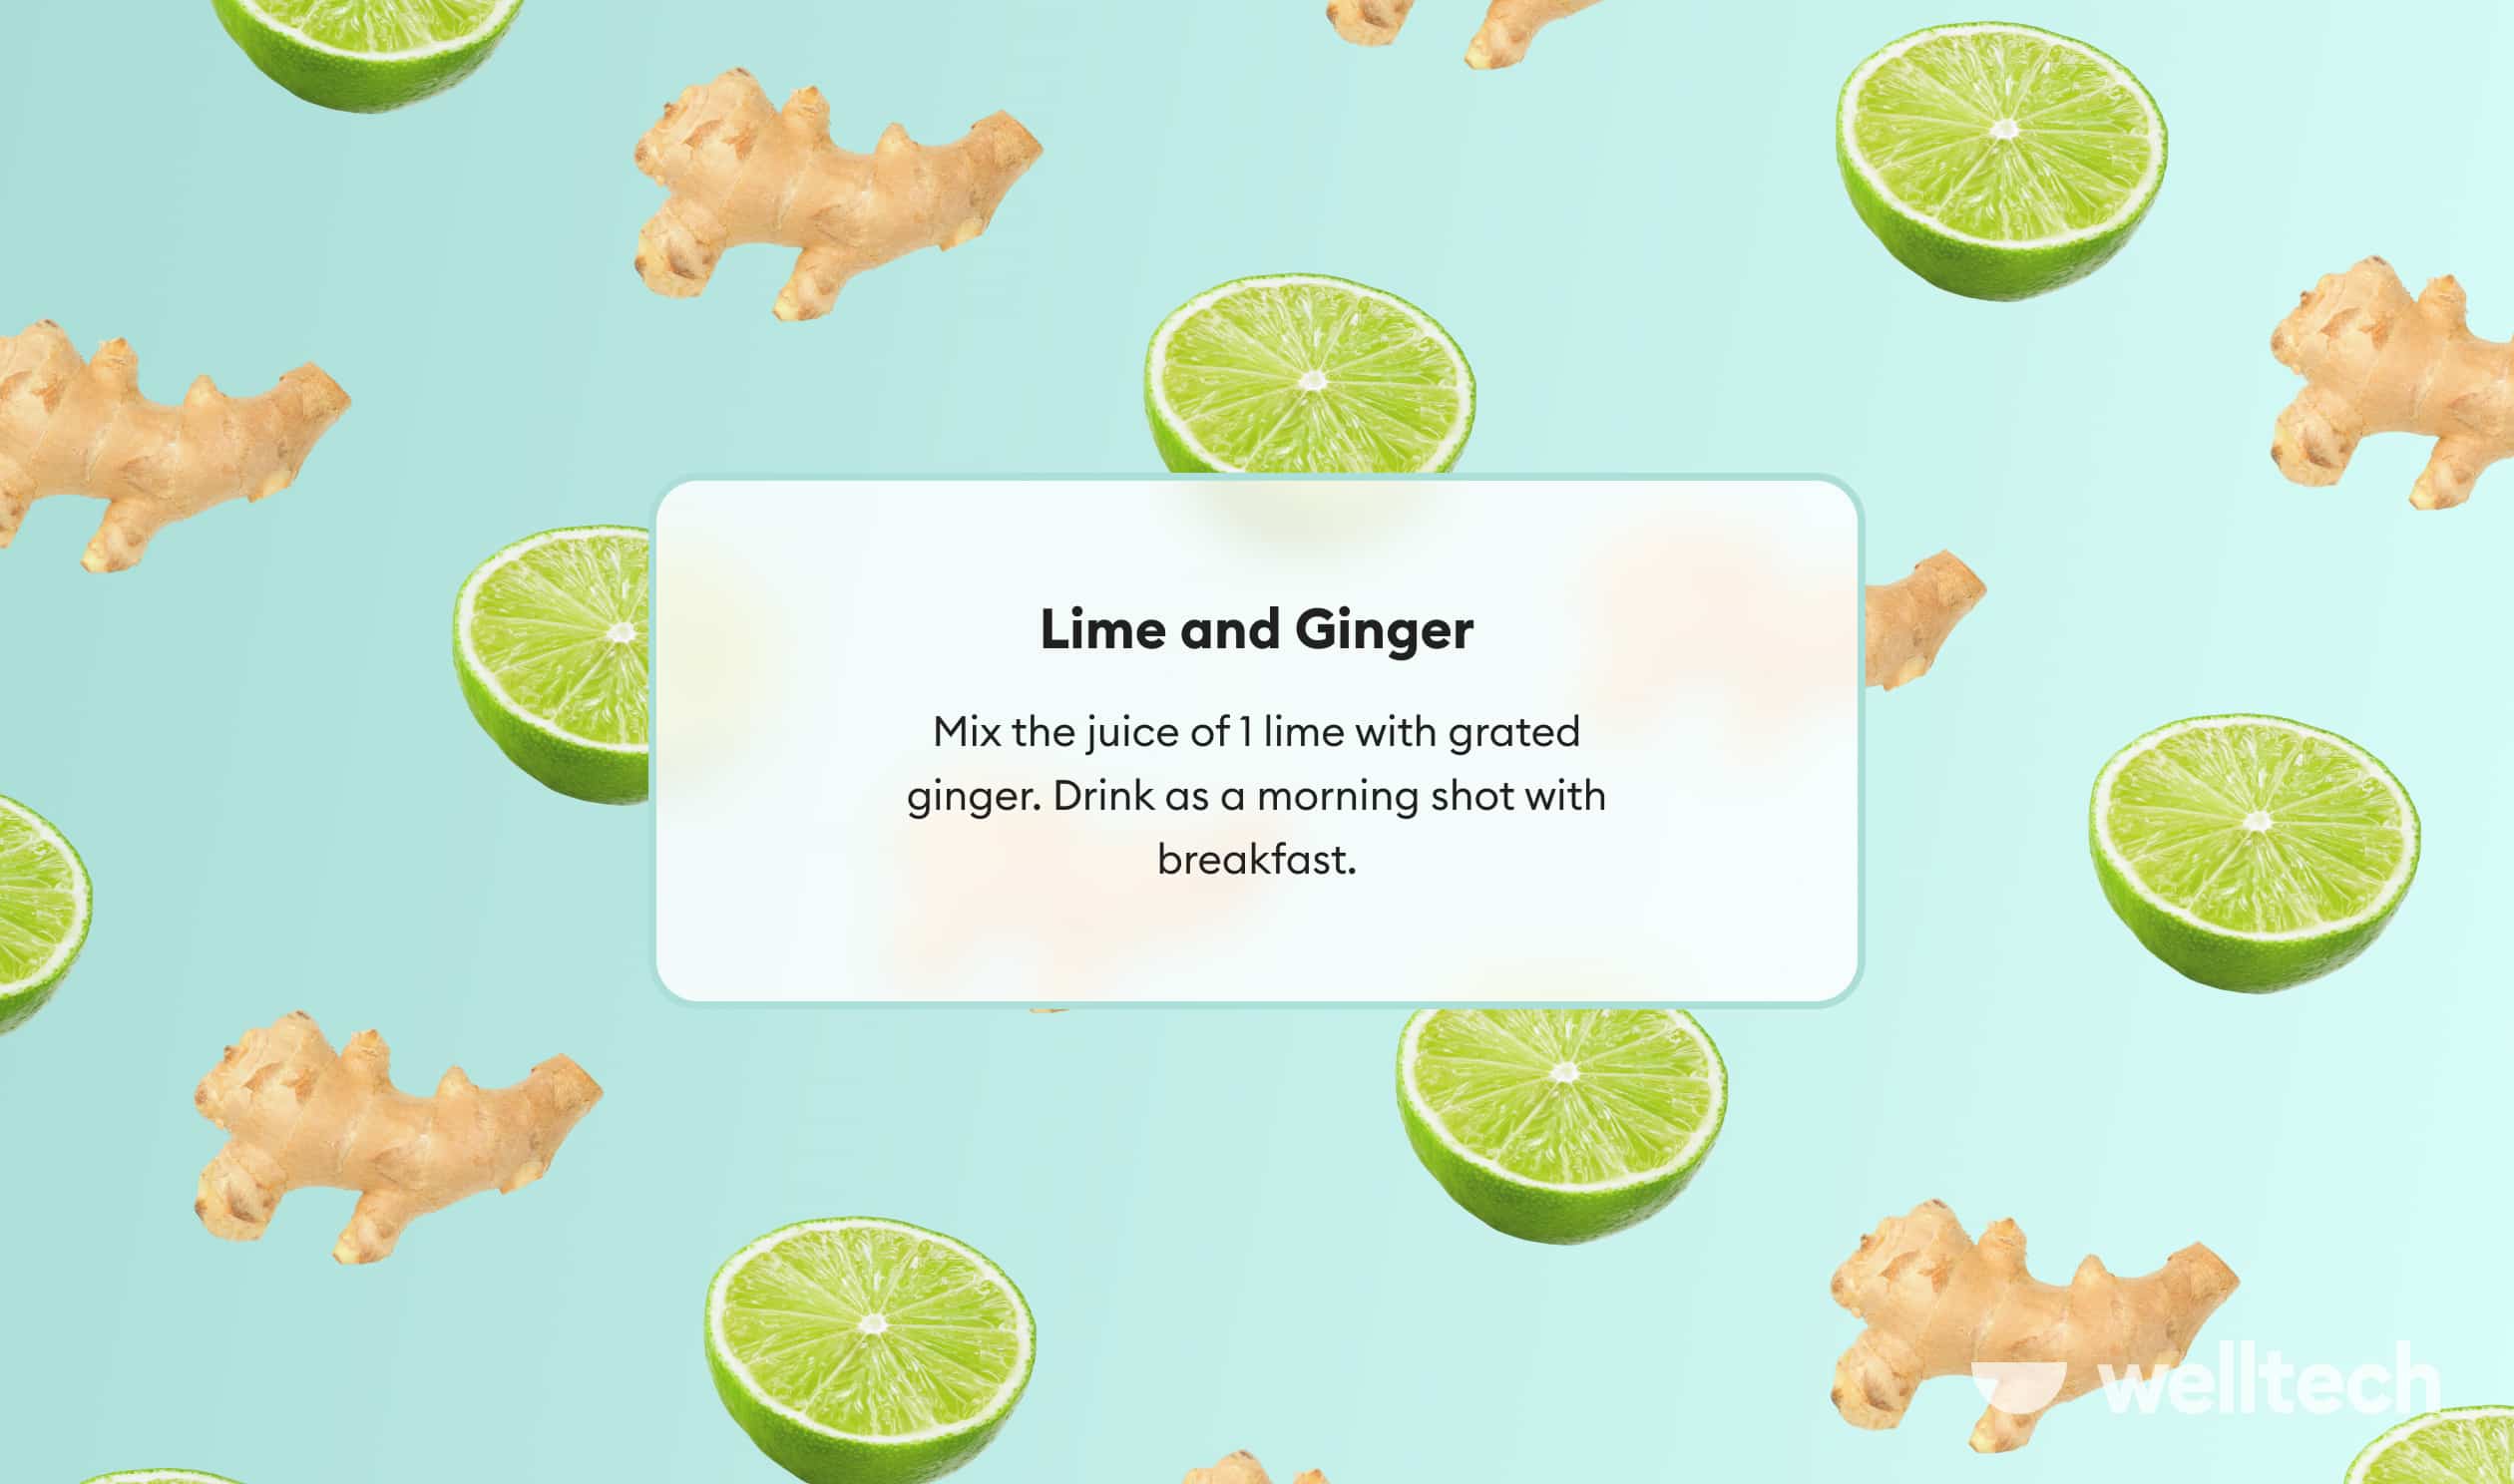 Lime and Ginger_miracle weight-loss drink recipes_homemade fat burner drink